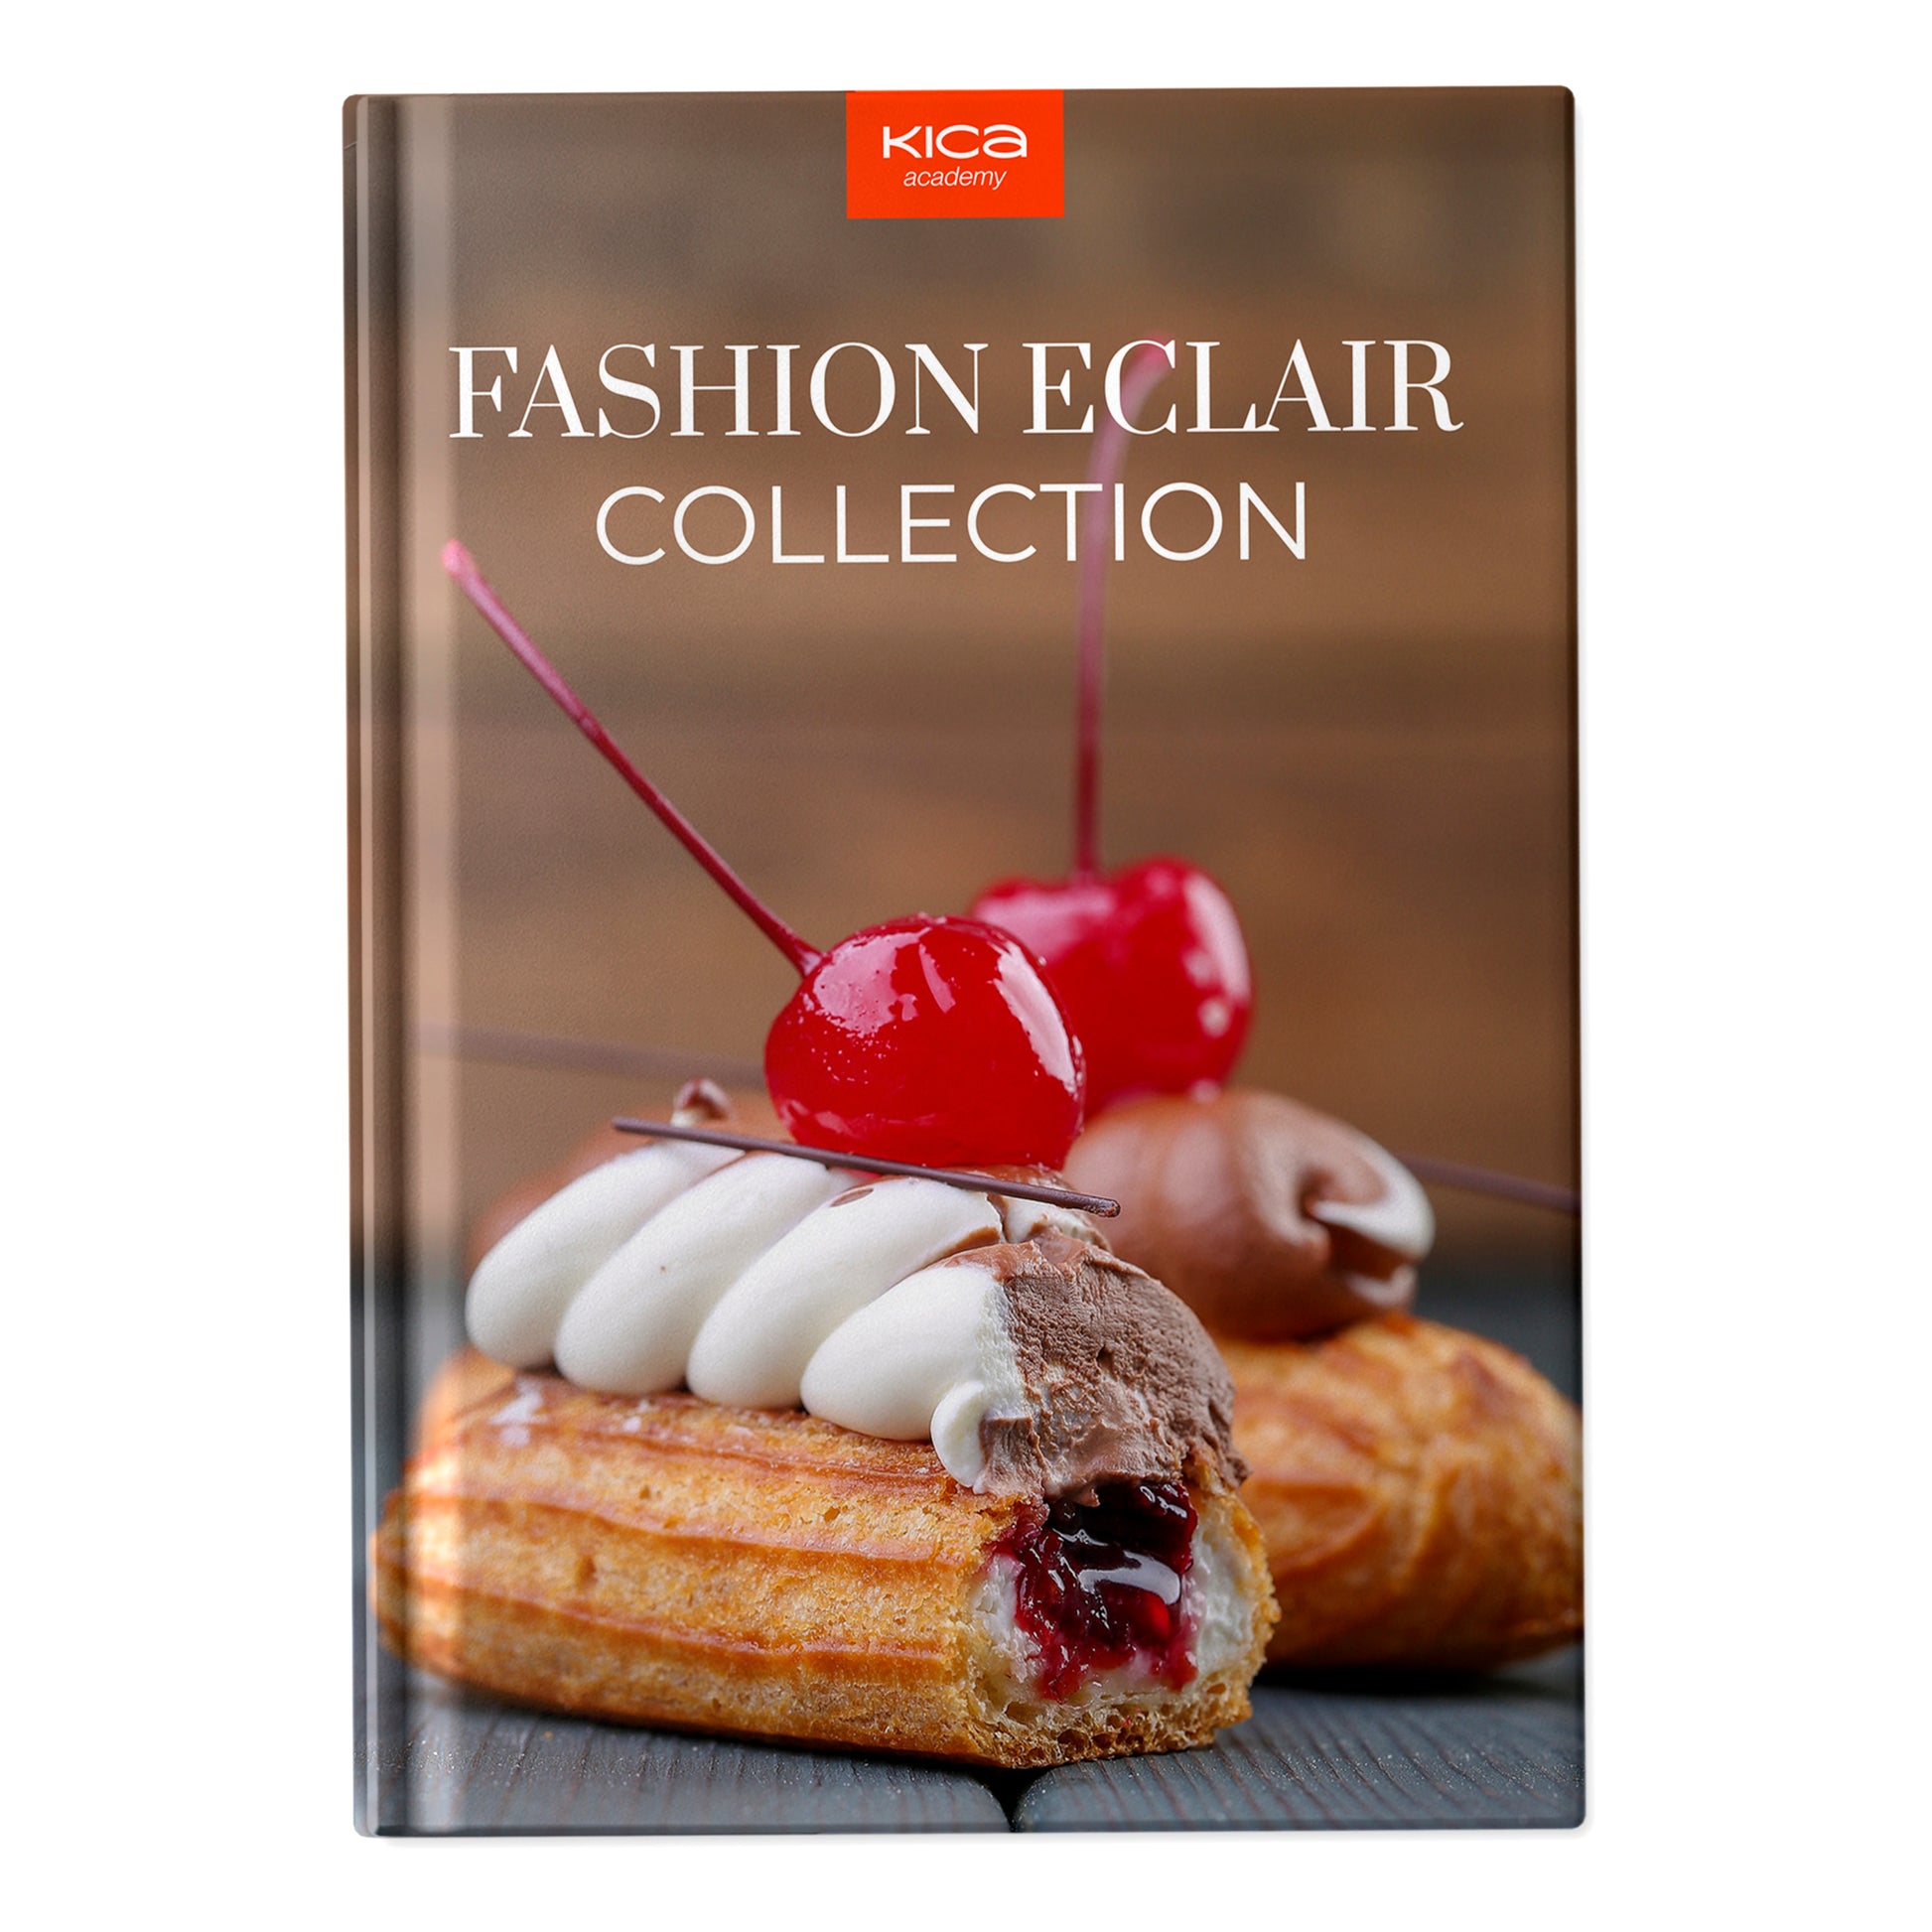 Fashion Eclair Collection